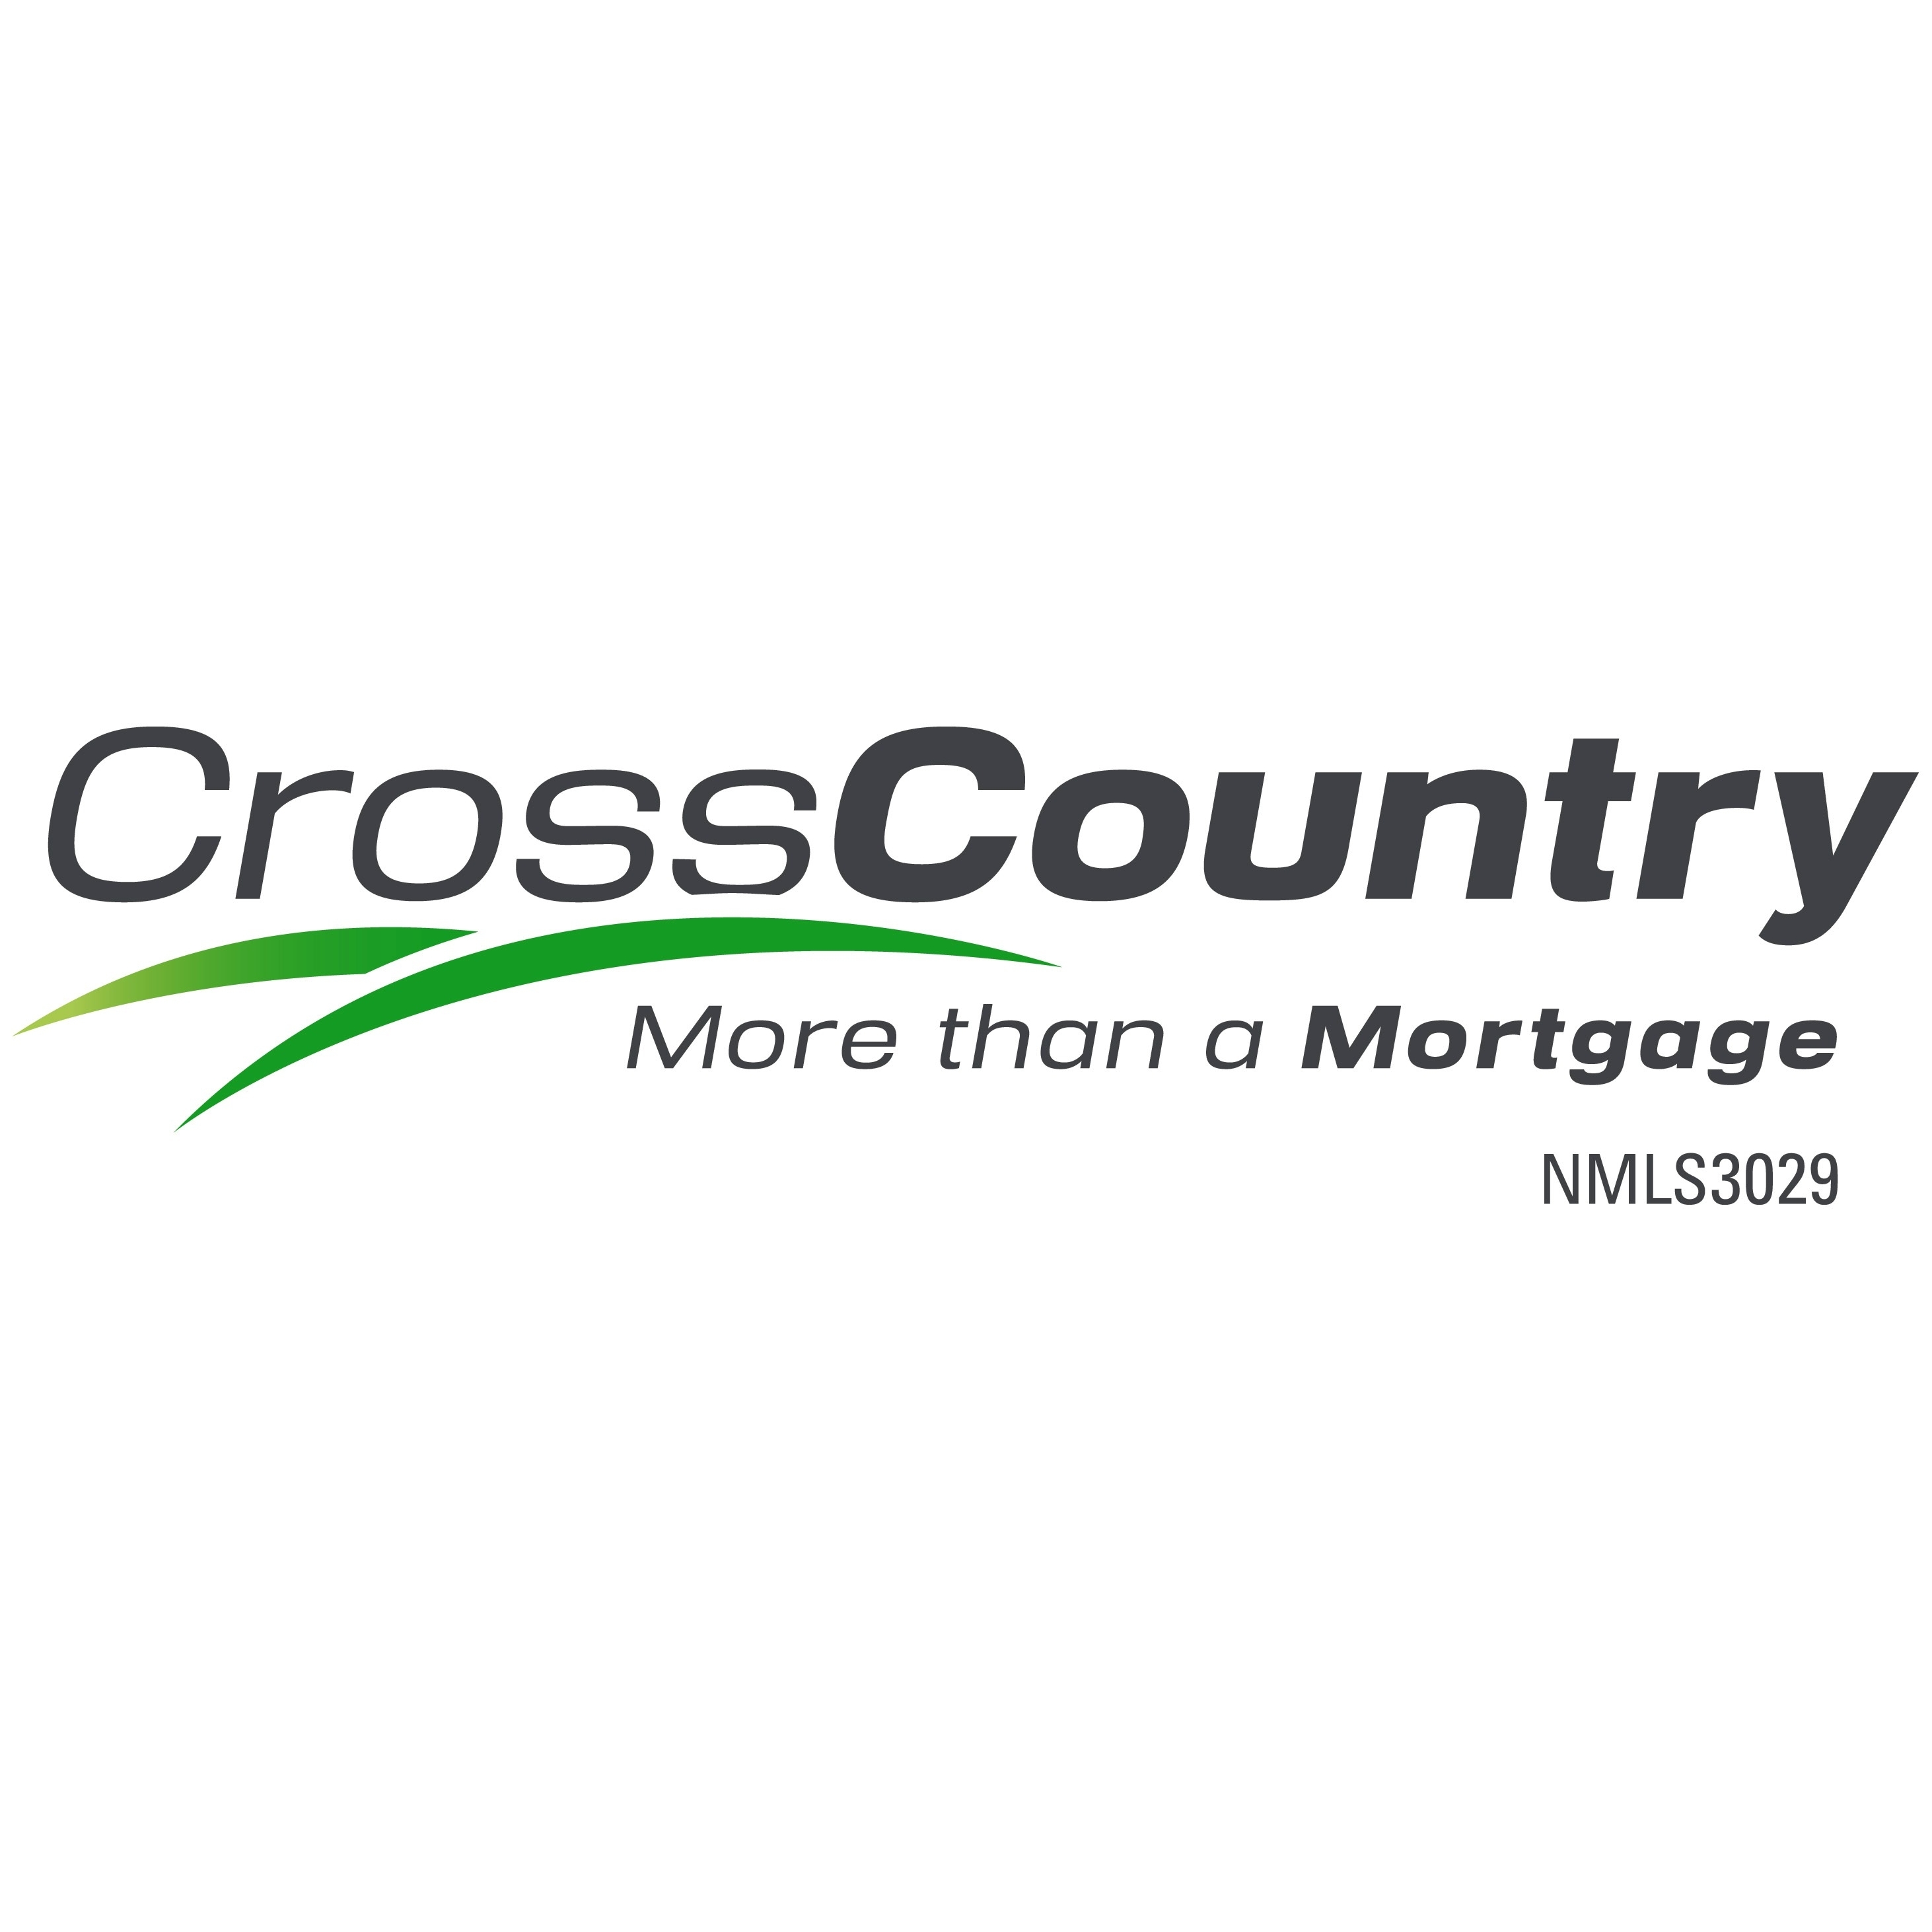 CrossCountry Mortgage Inc